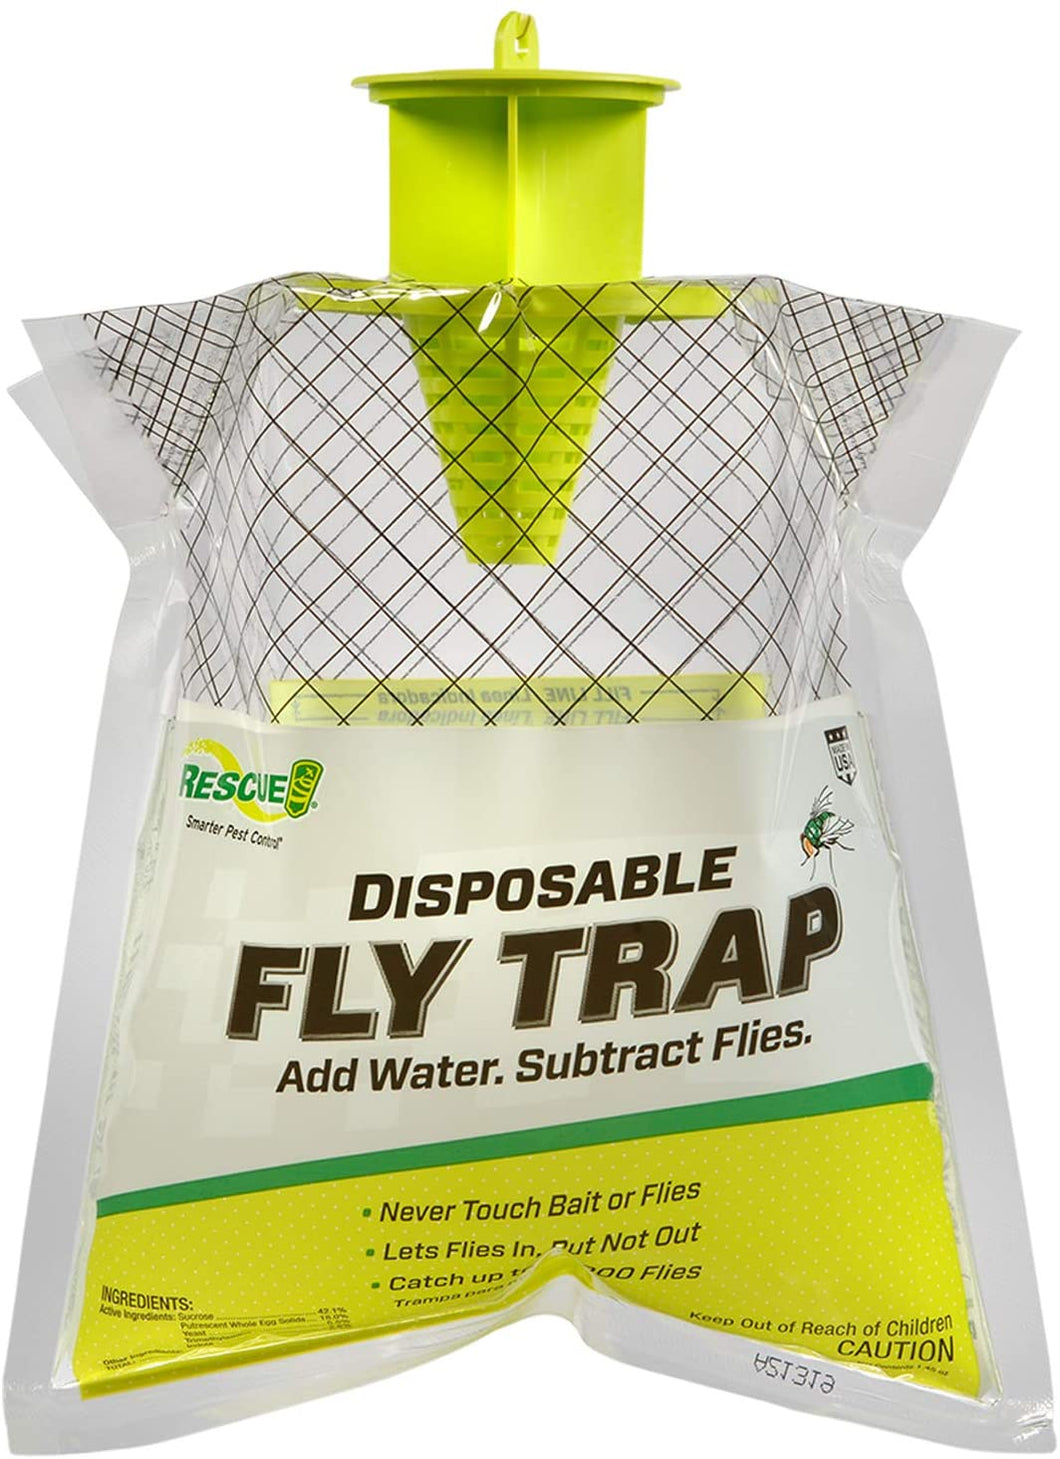 CHS Rescue Disposable Fly Trap (Small) contains a fast-acting attractant, that only needs water to be activated 